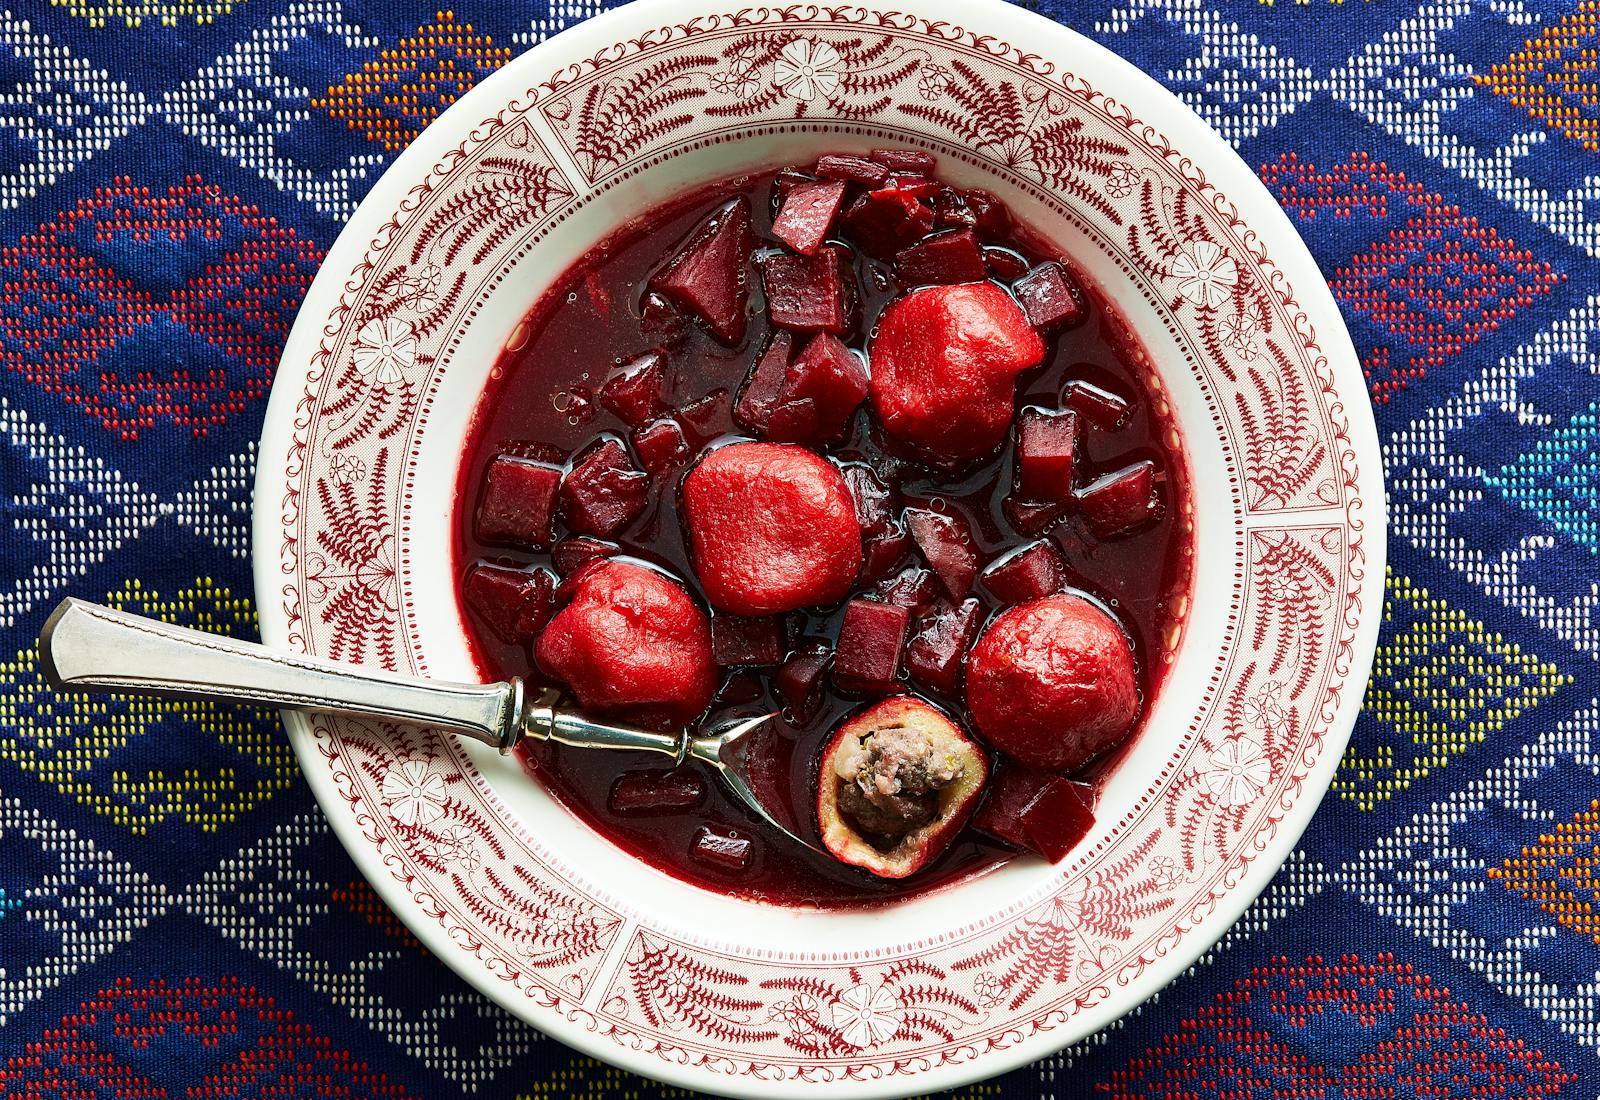 Beet kubbeh soup in red and white plate.